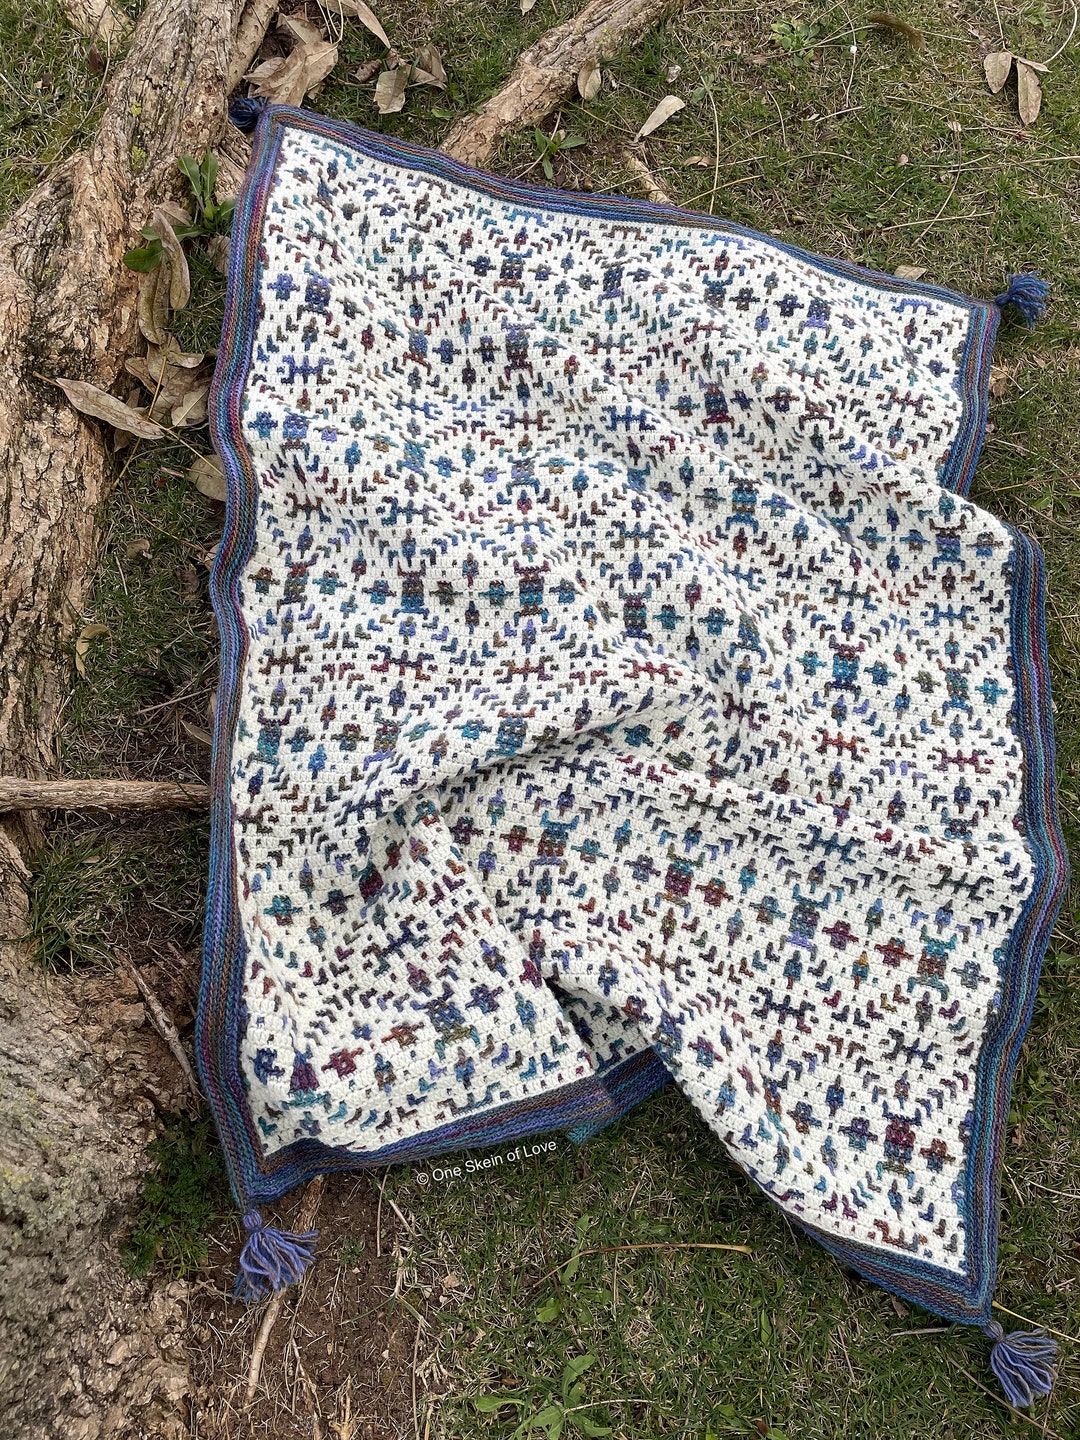 Radiance Blanket Download the Crochet Pattern Here